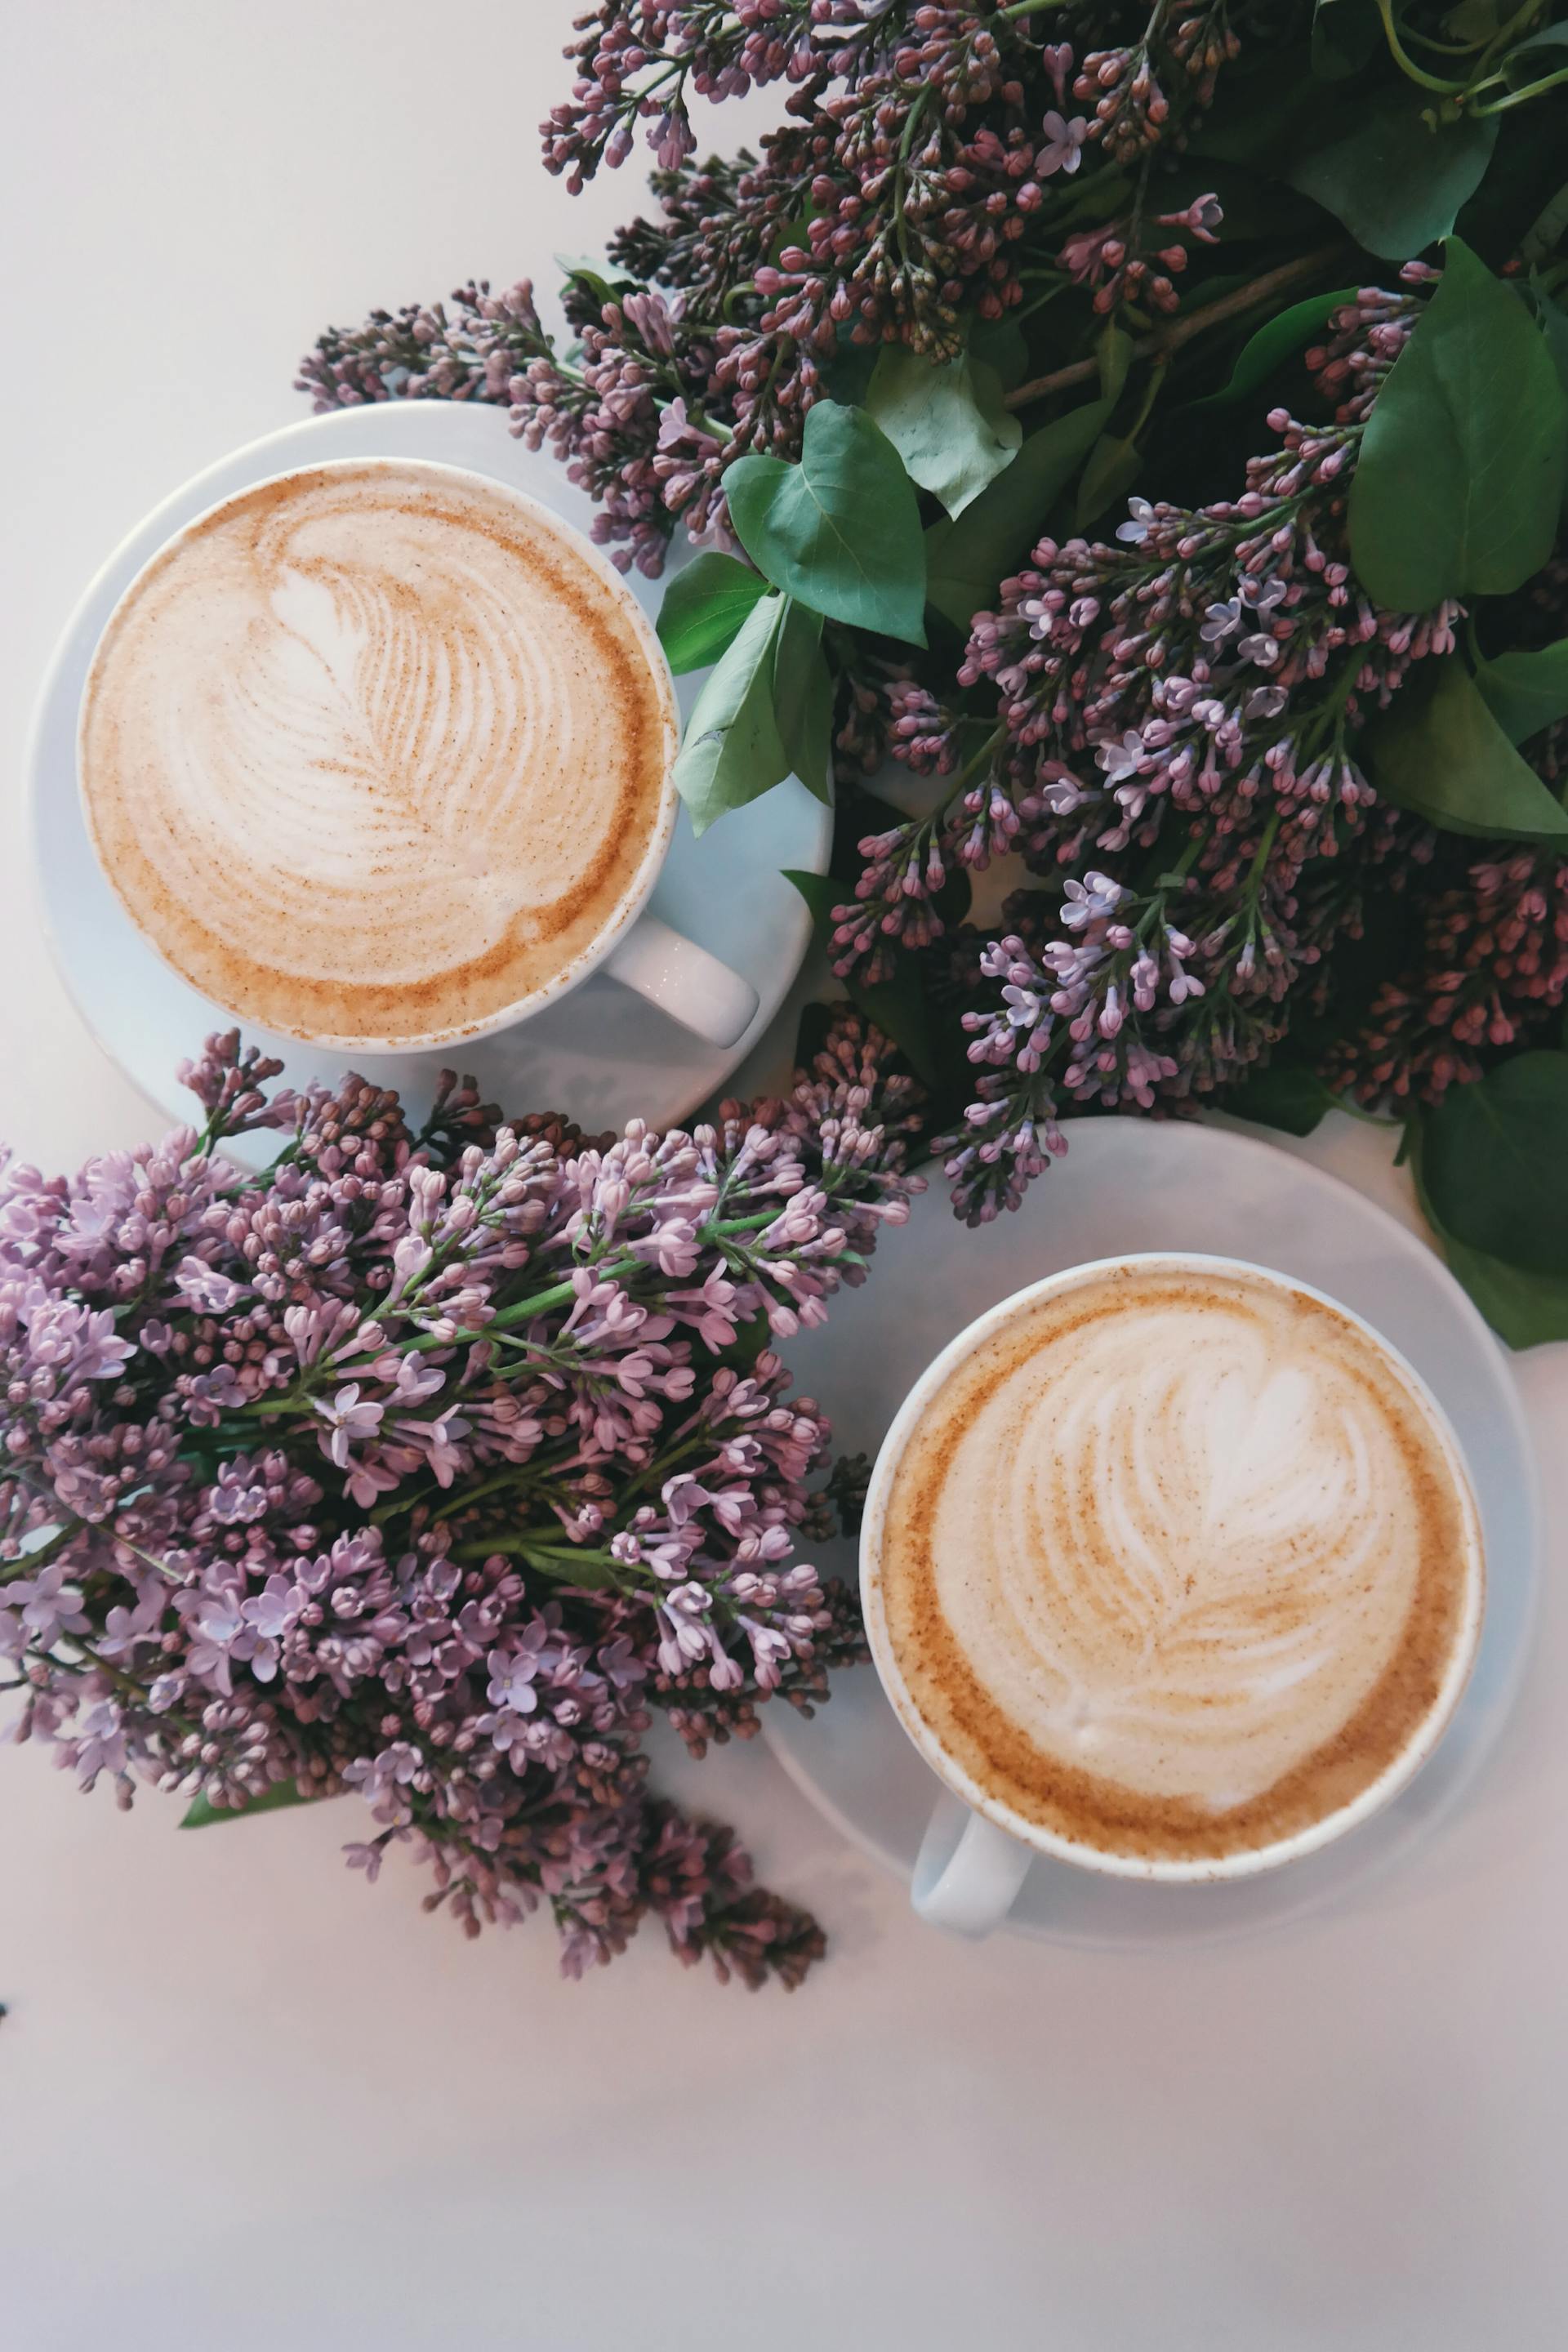 Two lattes on a table | Source: Pexels